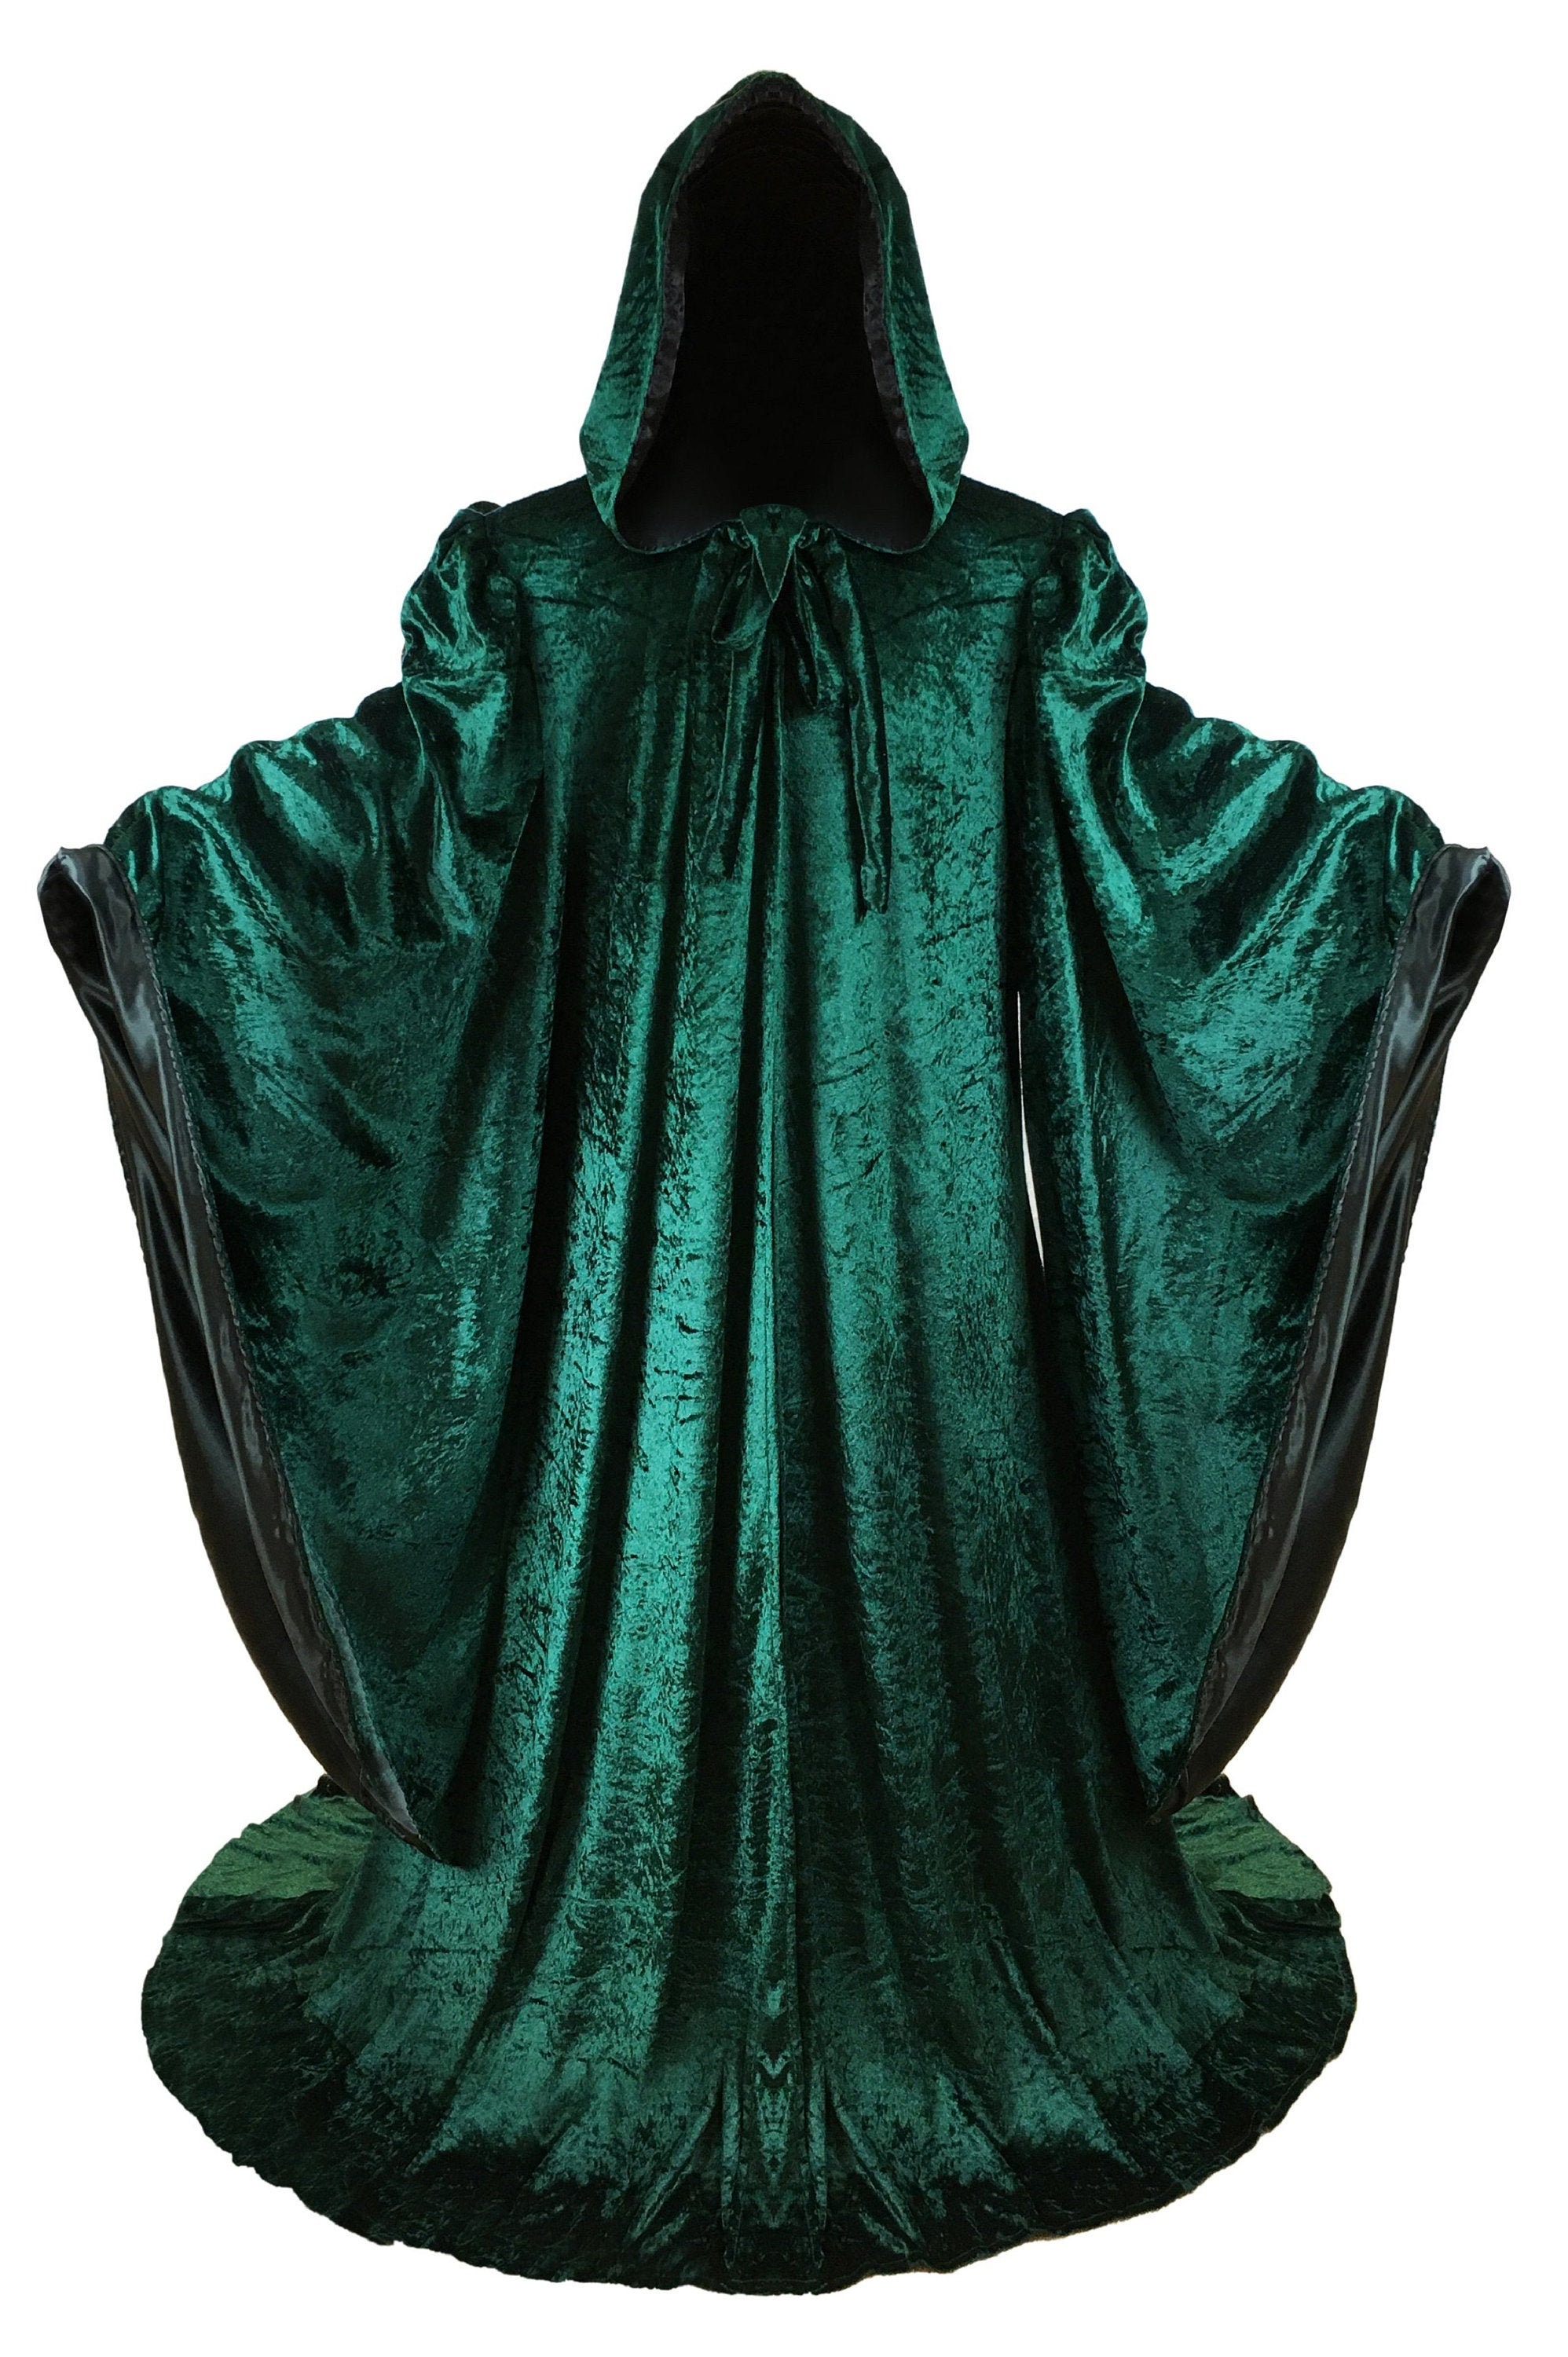 ethereal sparkly emerald green capes